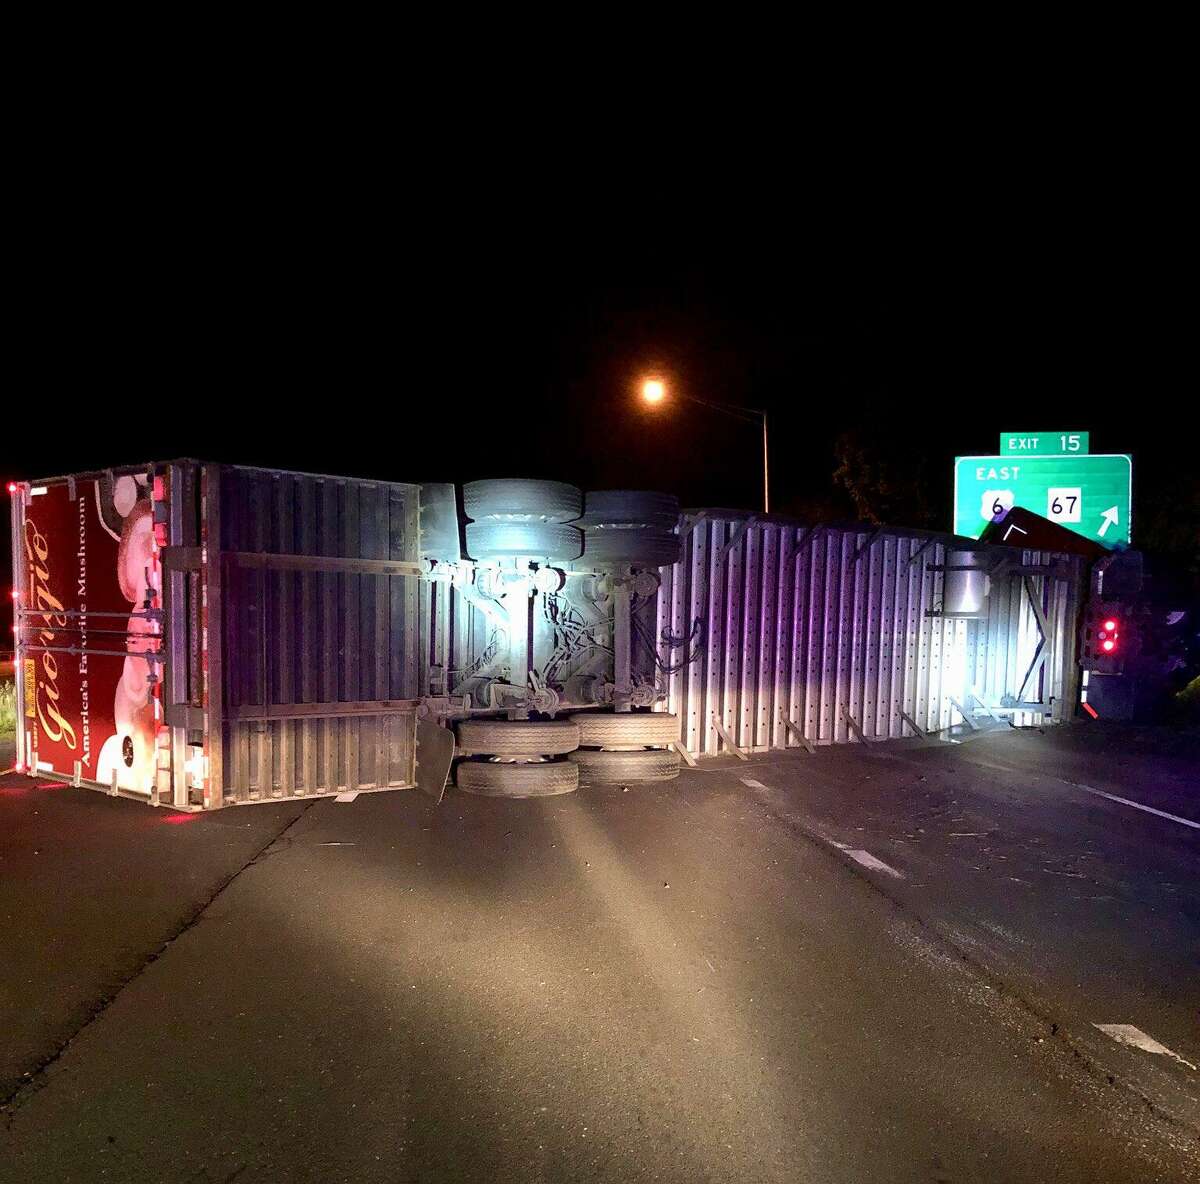 A tractor-trailer truck carrying mushrooms tolled over on eastbound I-84 in Southbury on Thursday, June 7, 2018. The accident, reported at 3:05 a.m., closed all eastbound lanes between Exits 14 and 15.